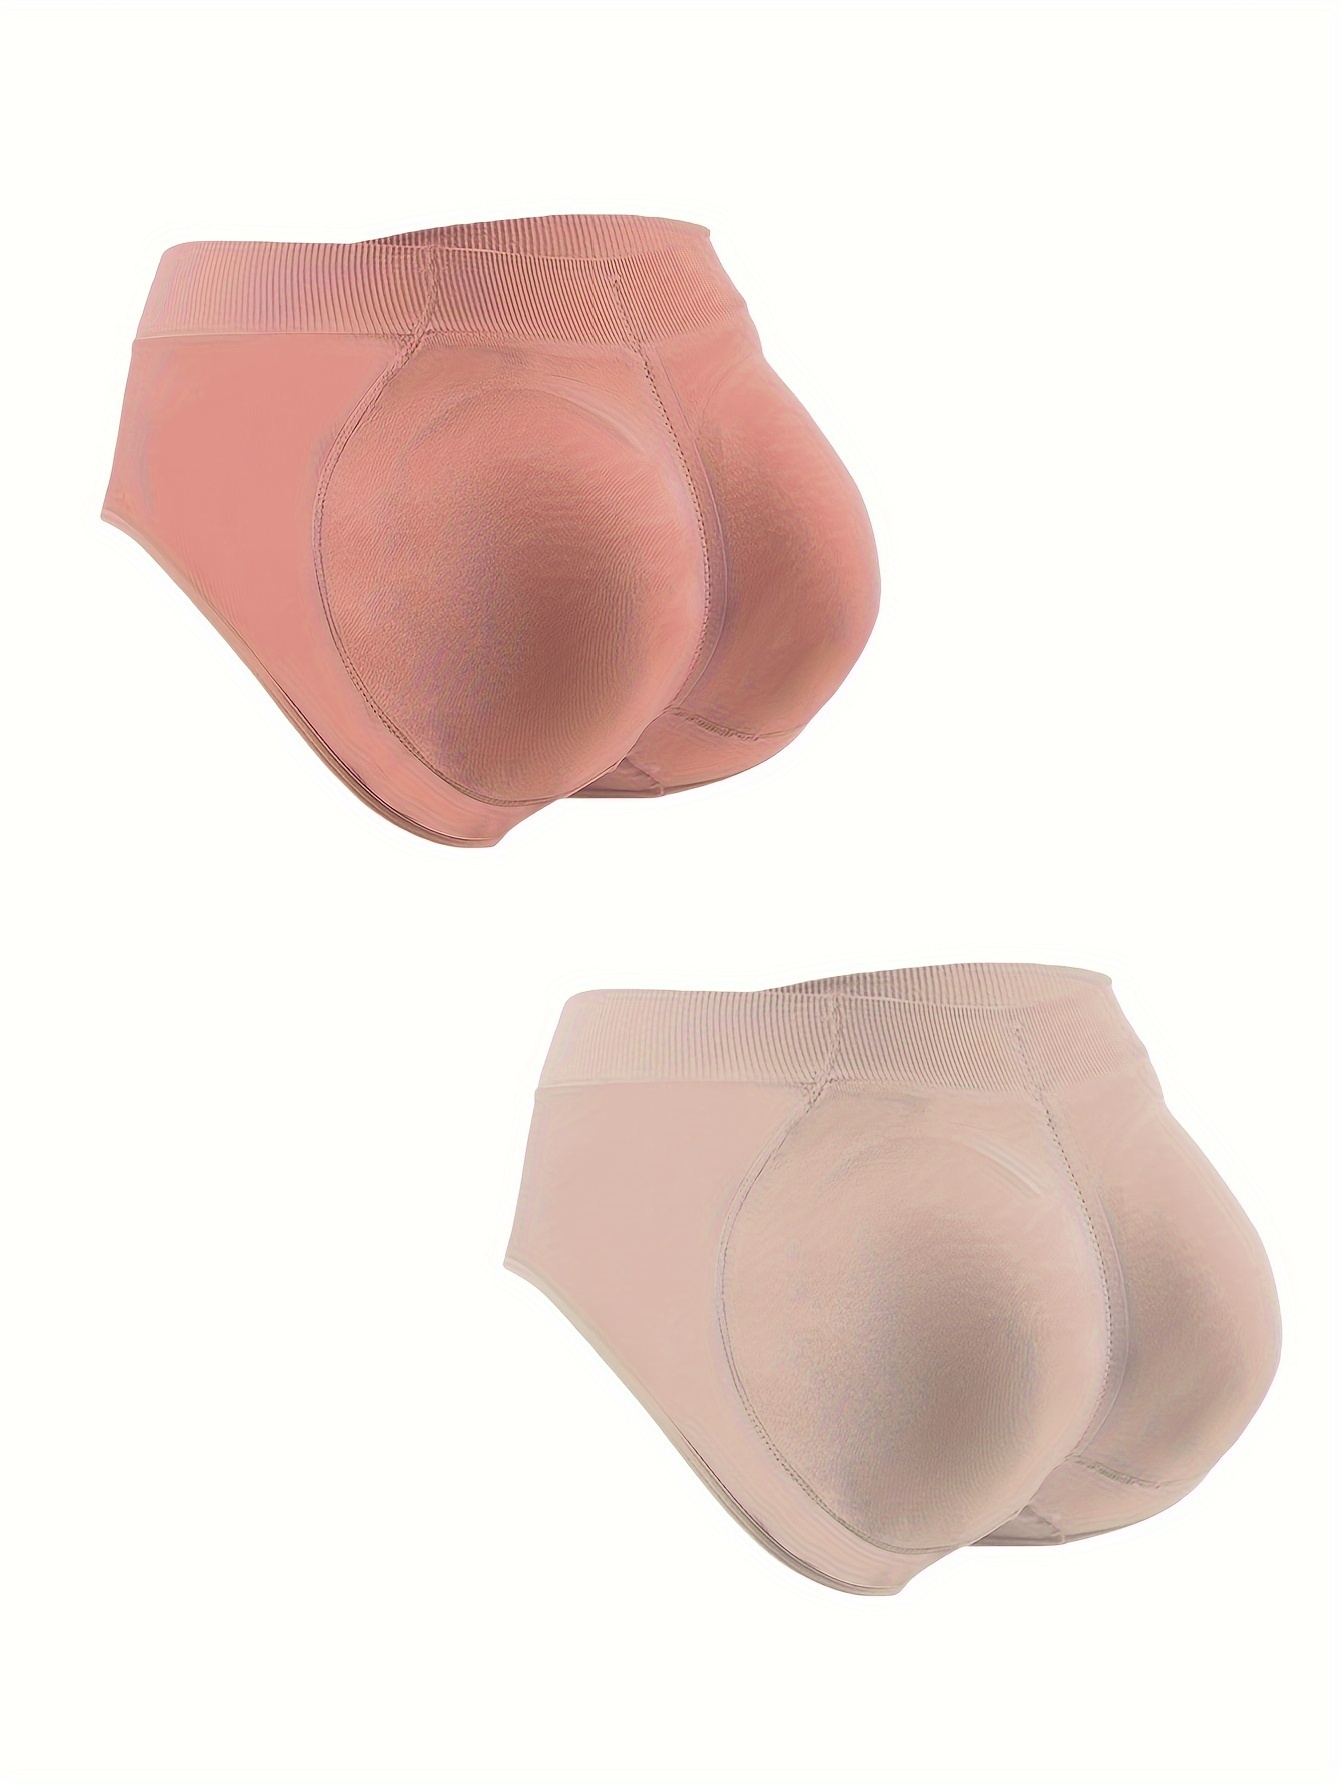 Breathable and Supportive Shapewear Panties for Men's Waist and Hip Lifting